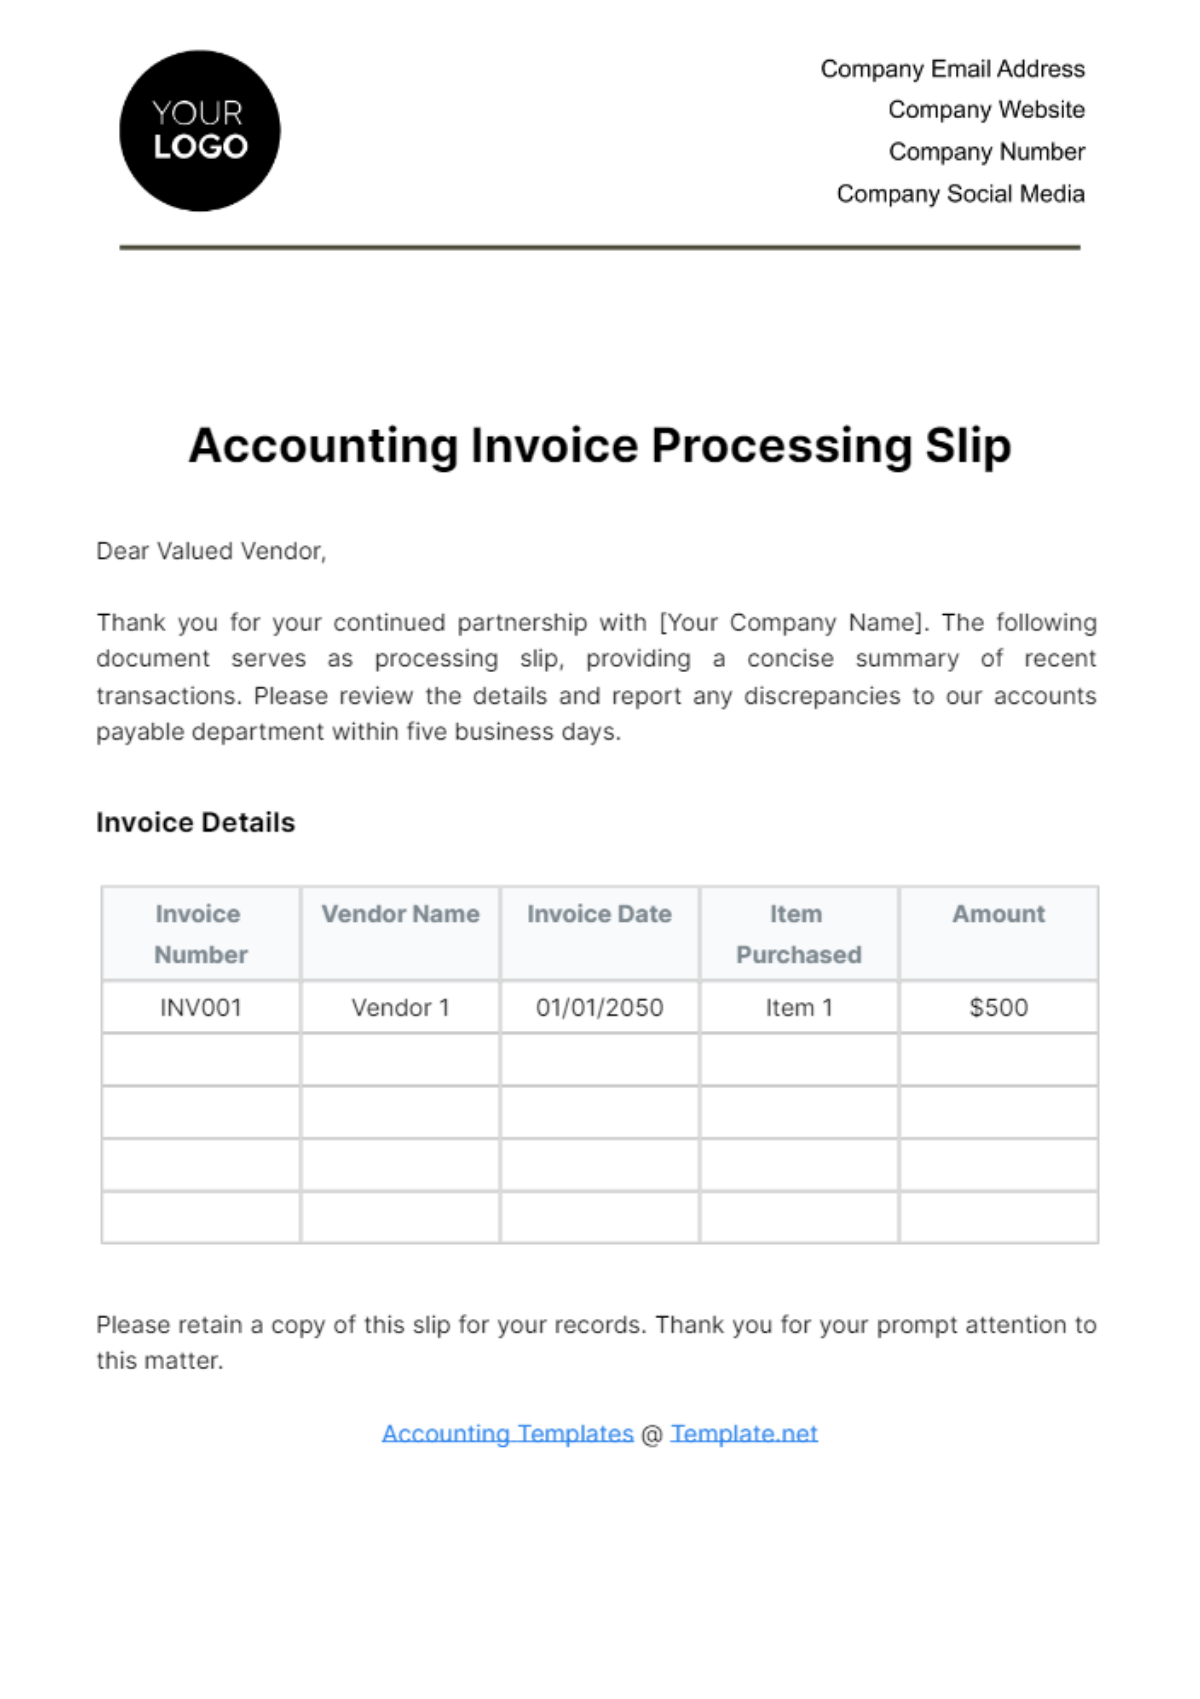 Accounting Invoice Processing Slip Template